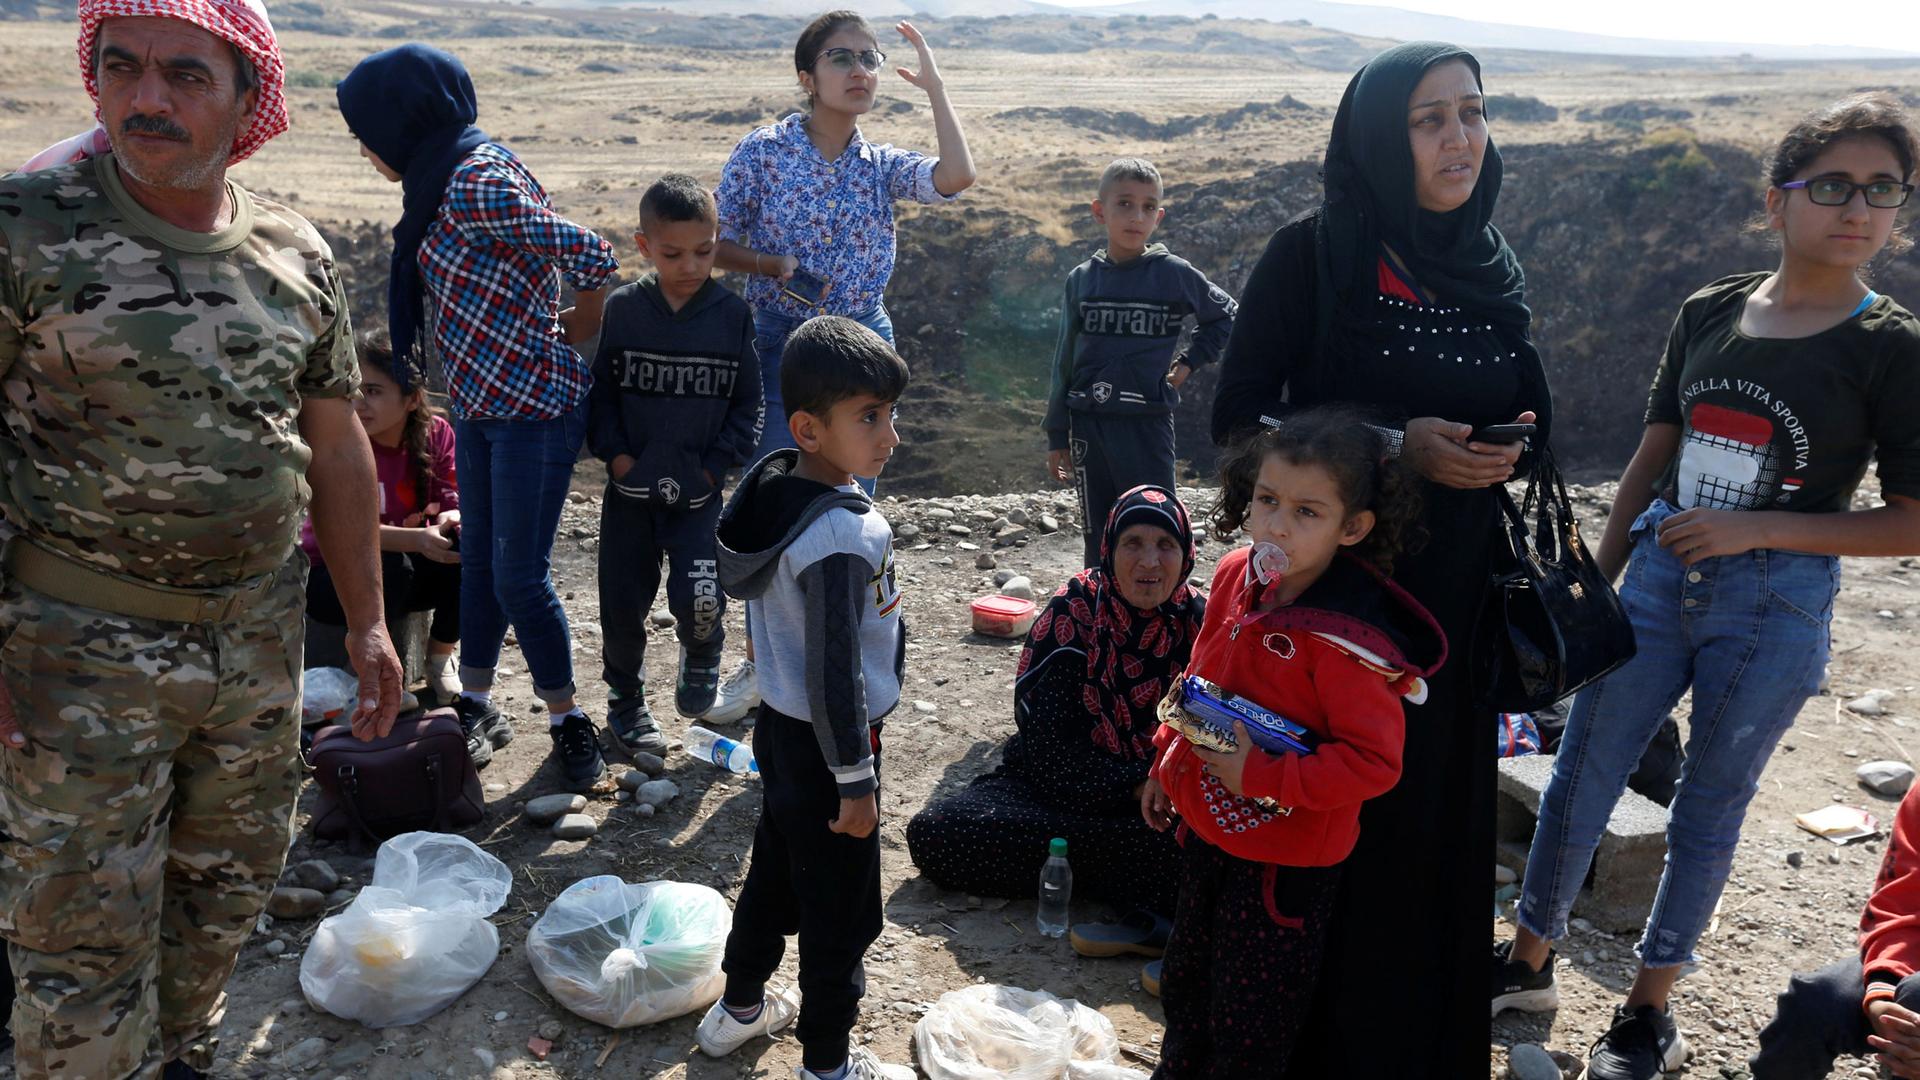 Displaced Kurds stuck at a border after a Turkish offensive in northeastern Syria, wait to try cross to the Iraqi side, at the Semalka crossing, next Derik city, Syria, on Oct. 21, 2019.